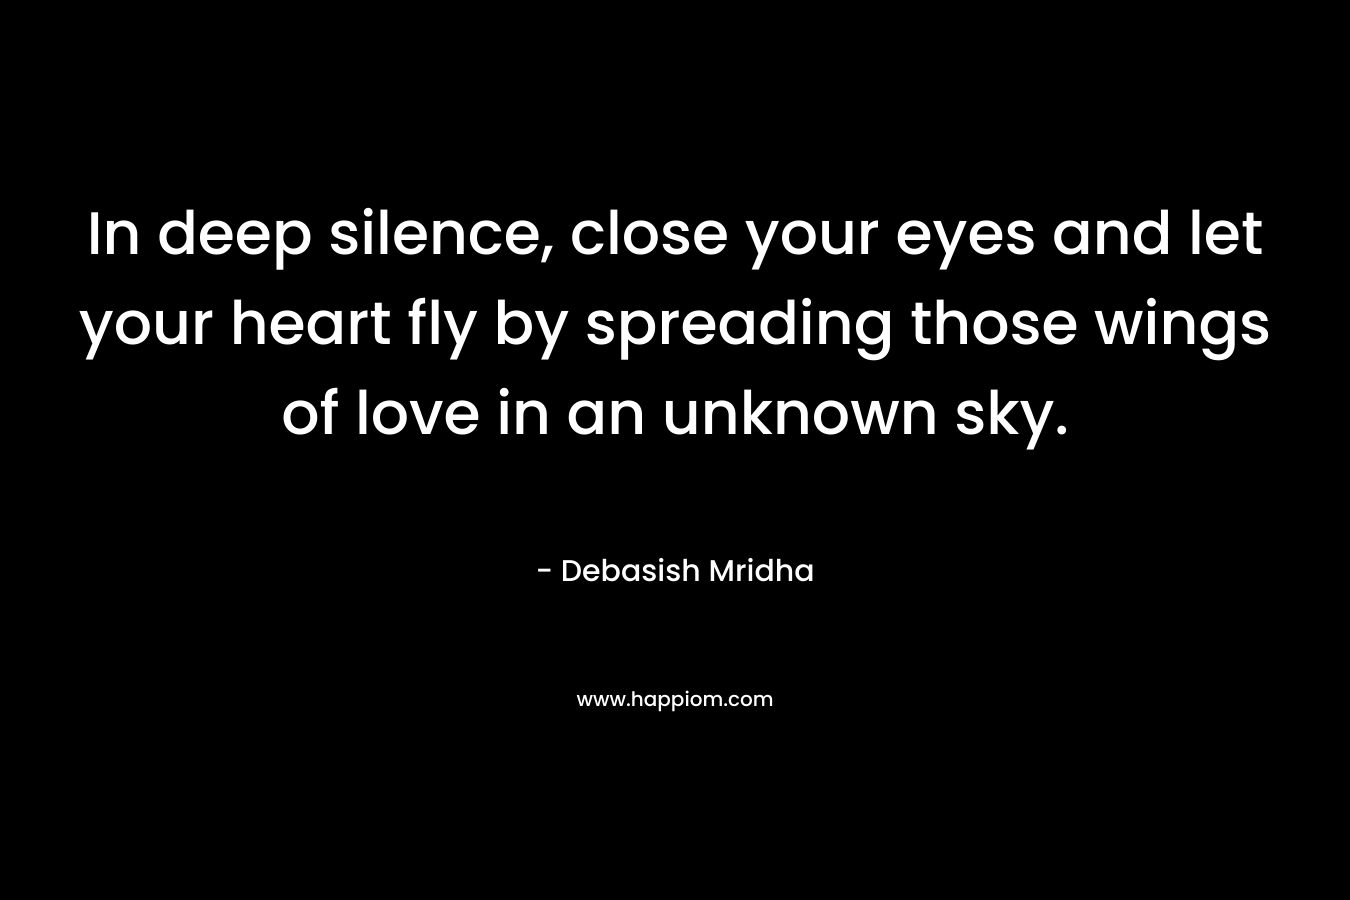 In deep silence, close your eyes and let your heart fly by spreading those wings of love in an unknown sky.